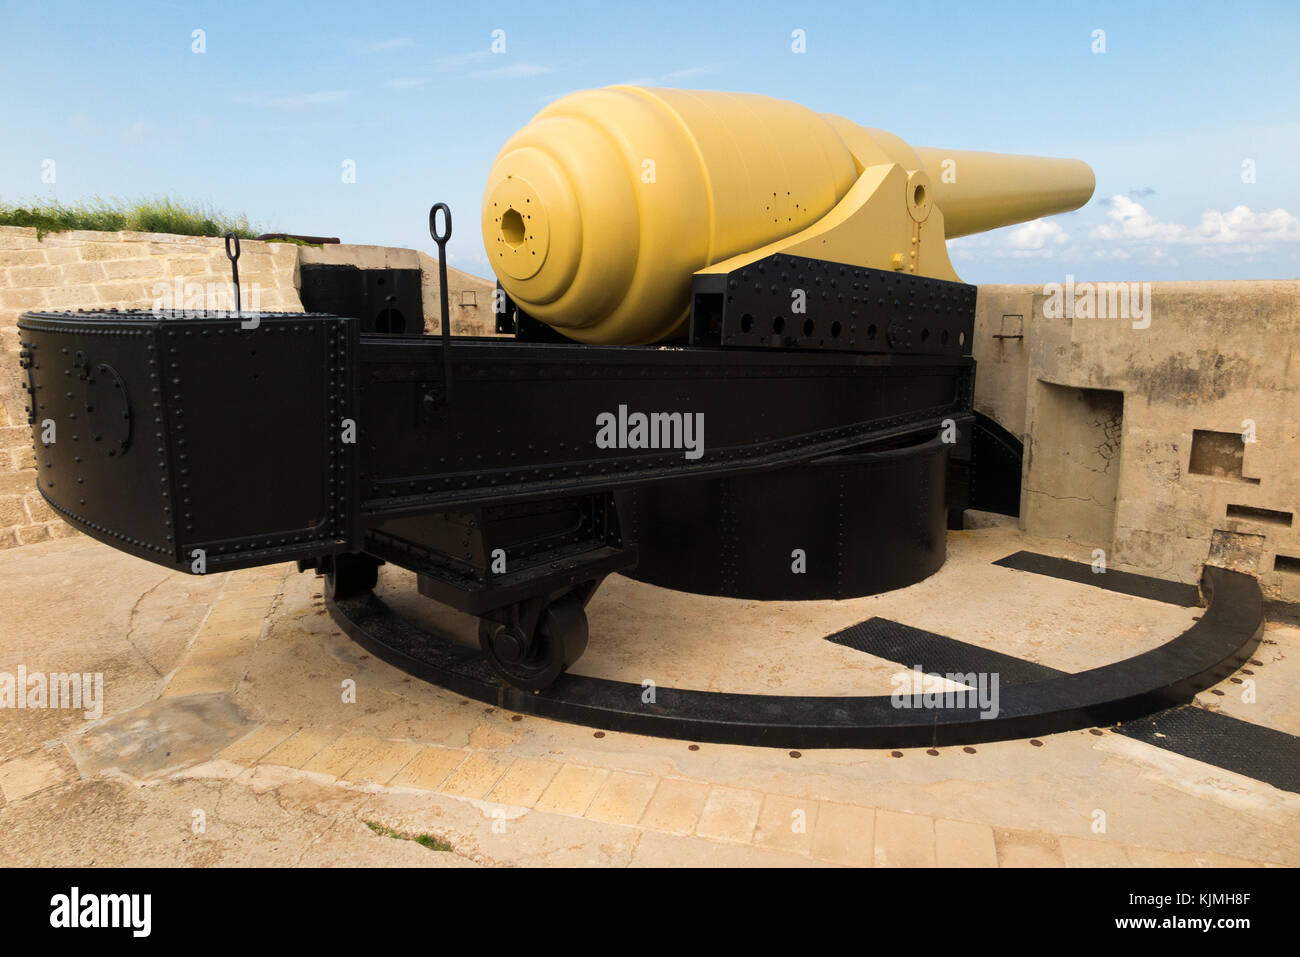 The Armstrong 100 ton gun at Fort Rinella, Malta. The muzzle loading 100 ton gun is the largest front loading cannon / gun battery in the world. (91) Stock Photo